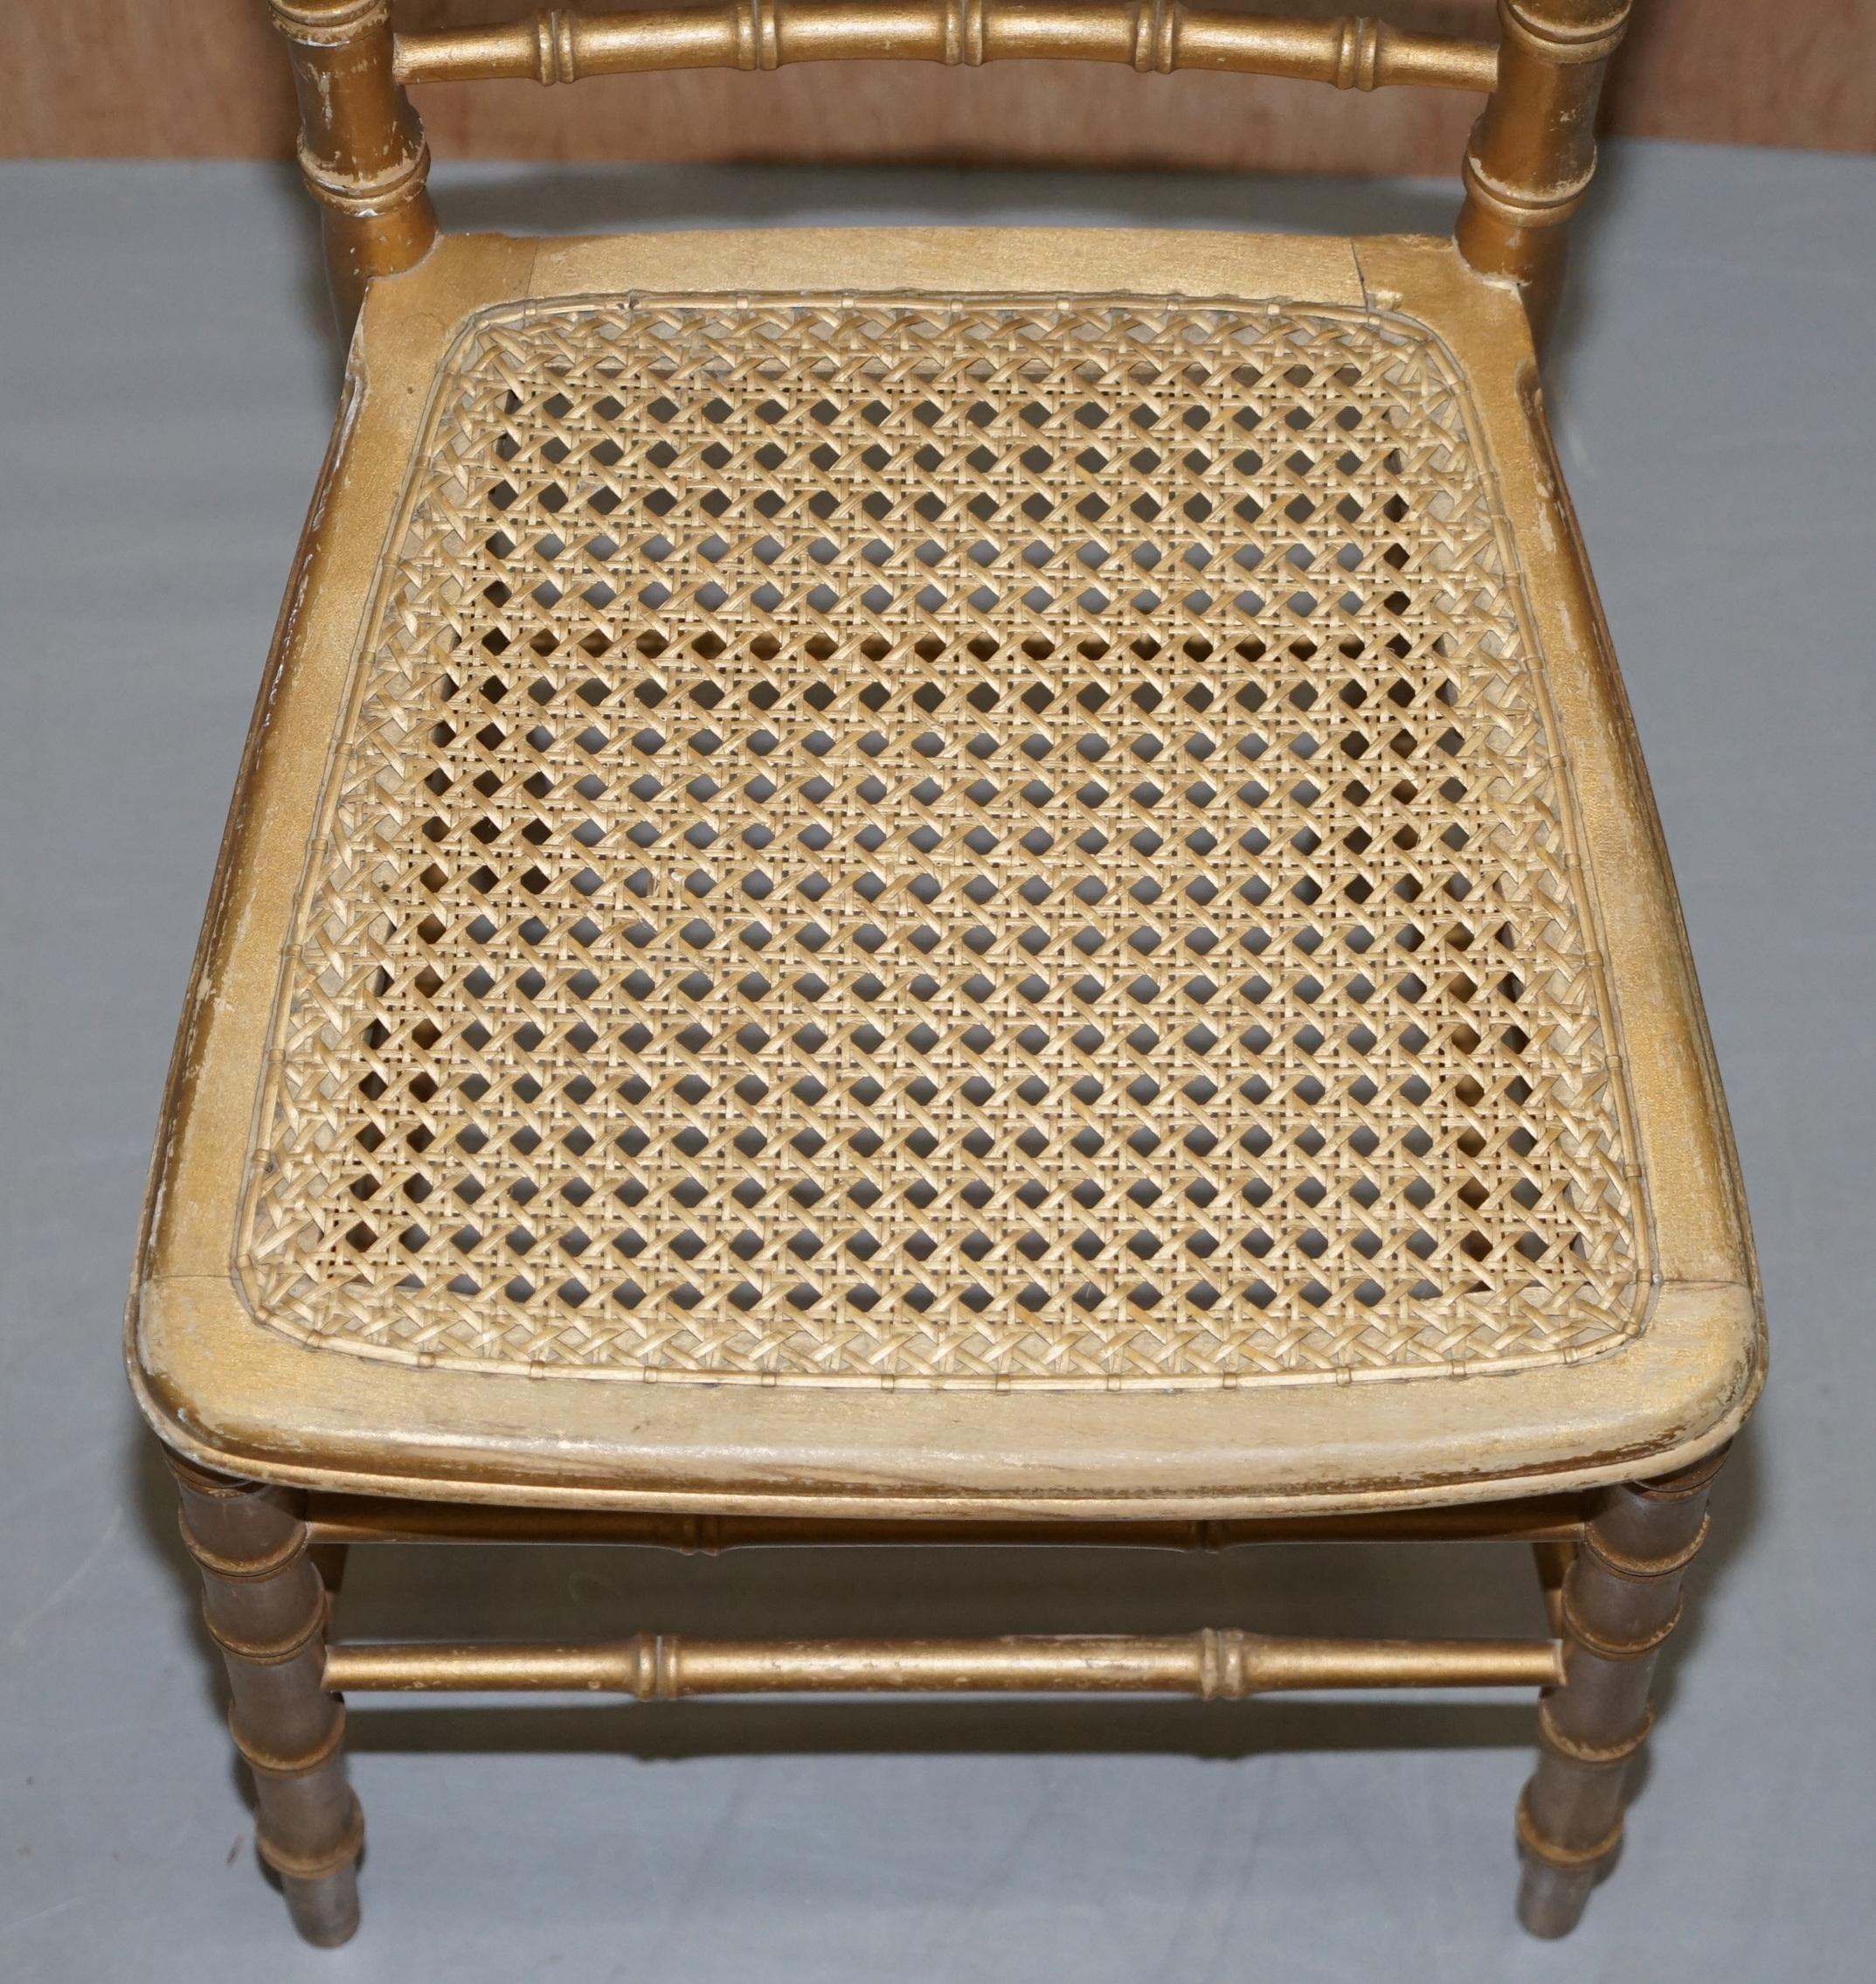 Hand-Crafted Edwardian Giltwood Famboo Regency Style Berger Chair with Newly Gold Giilt Frame For Sale